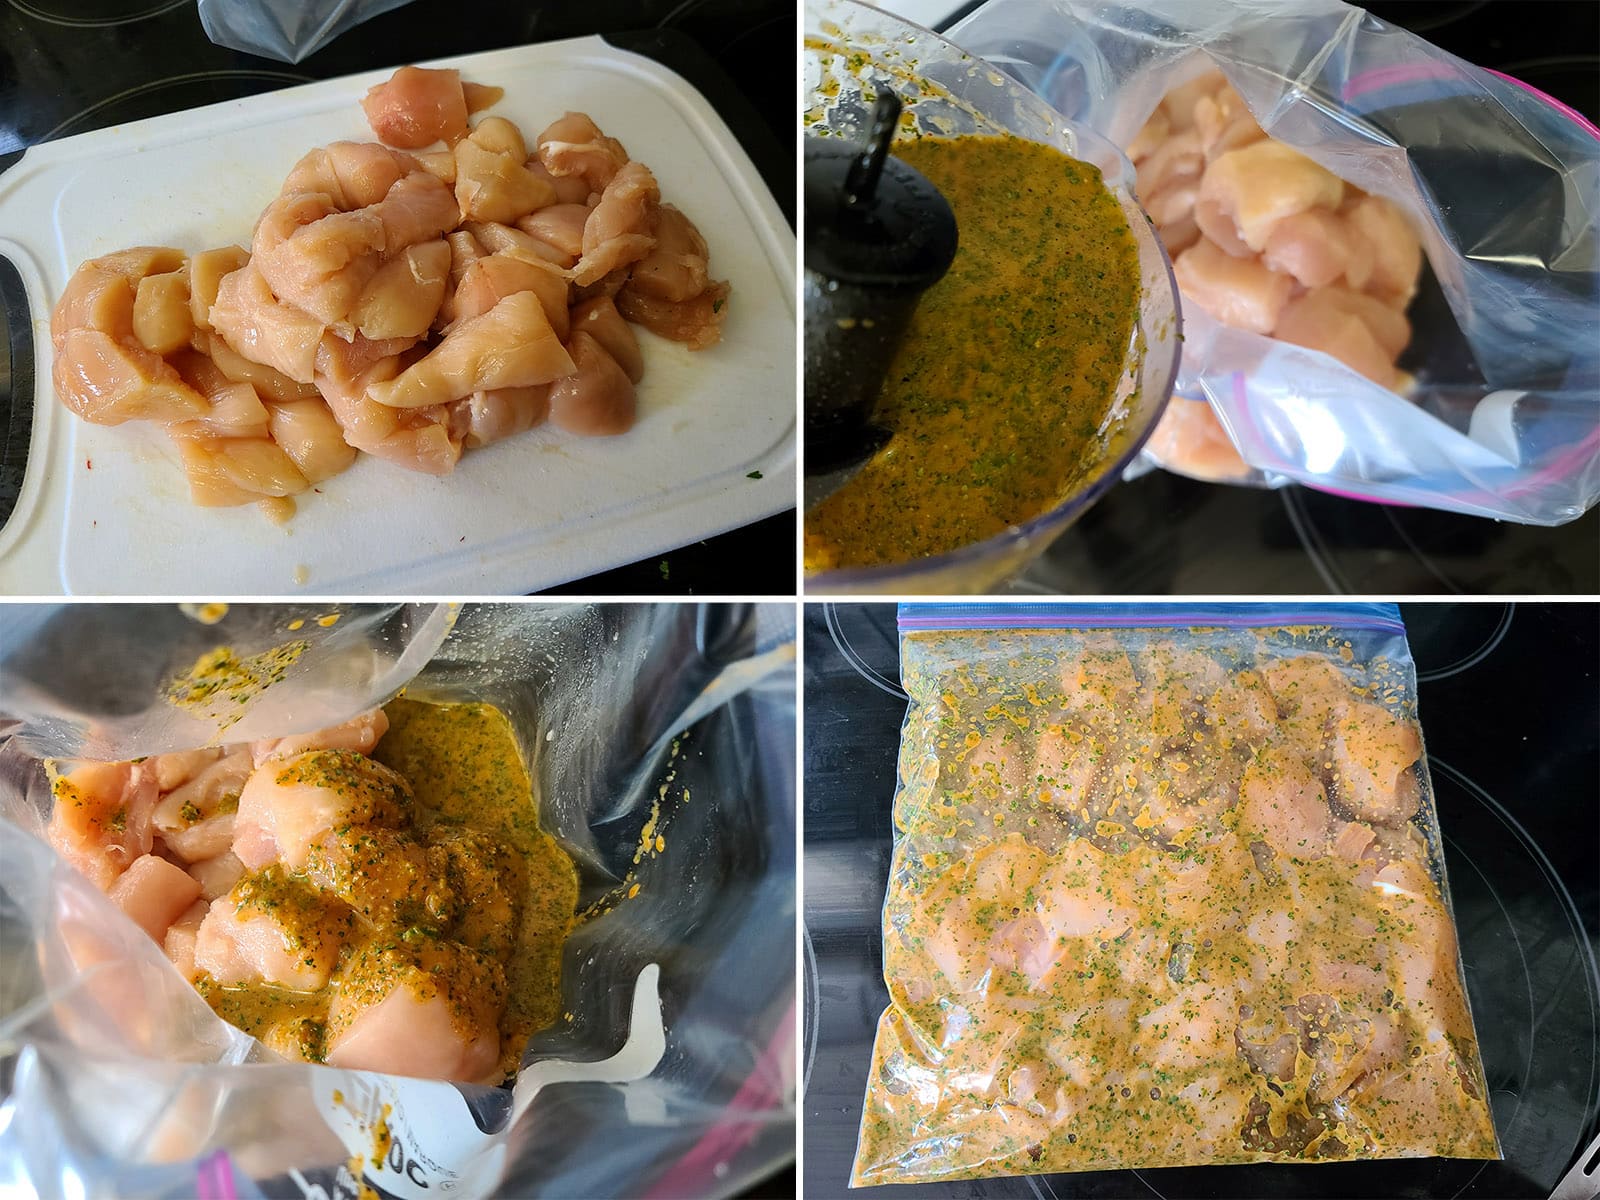 A 4 part image showing the chicken breast being cut up and marinated in a large plastic baggie.